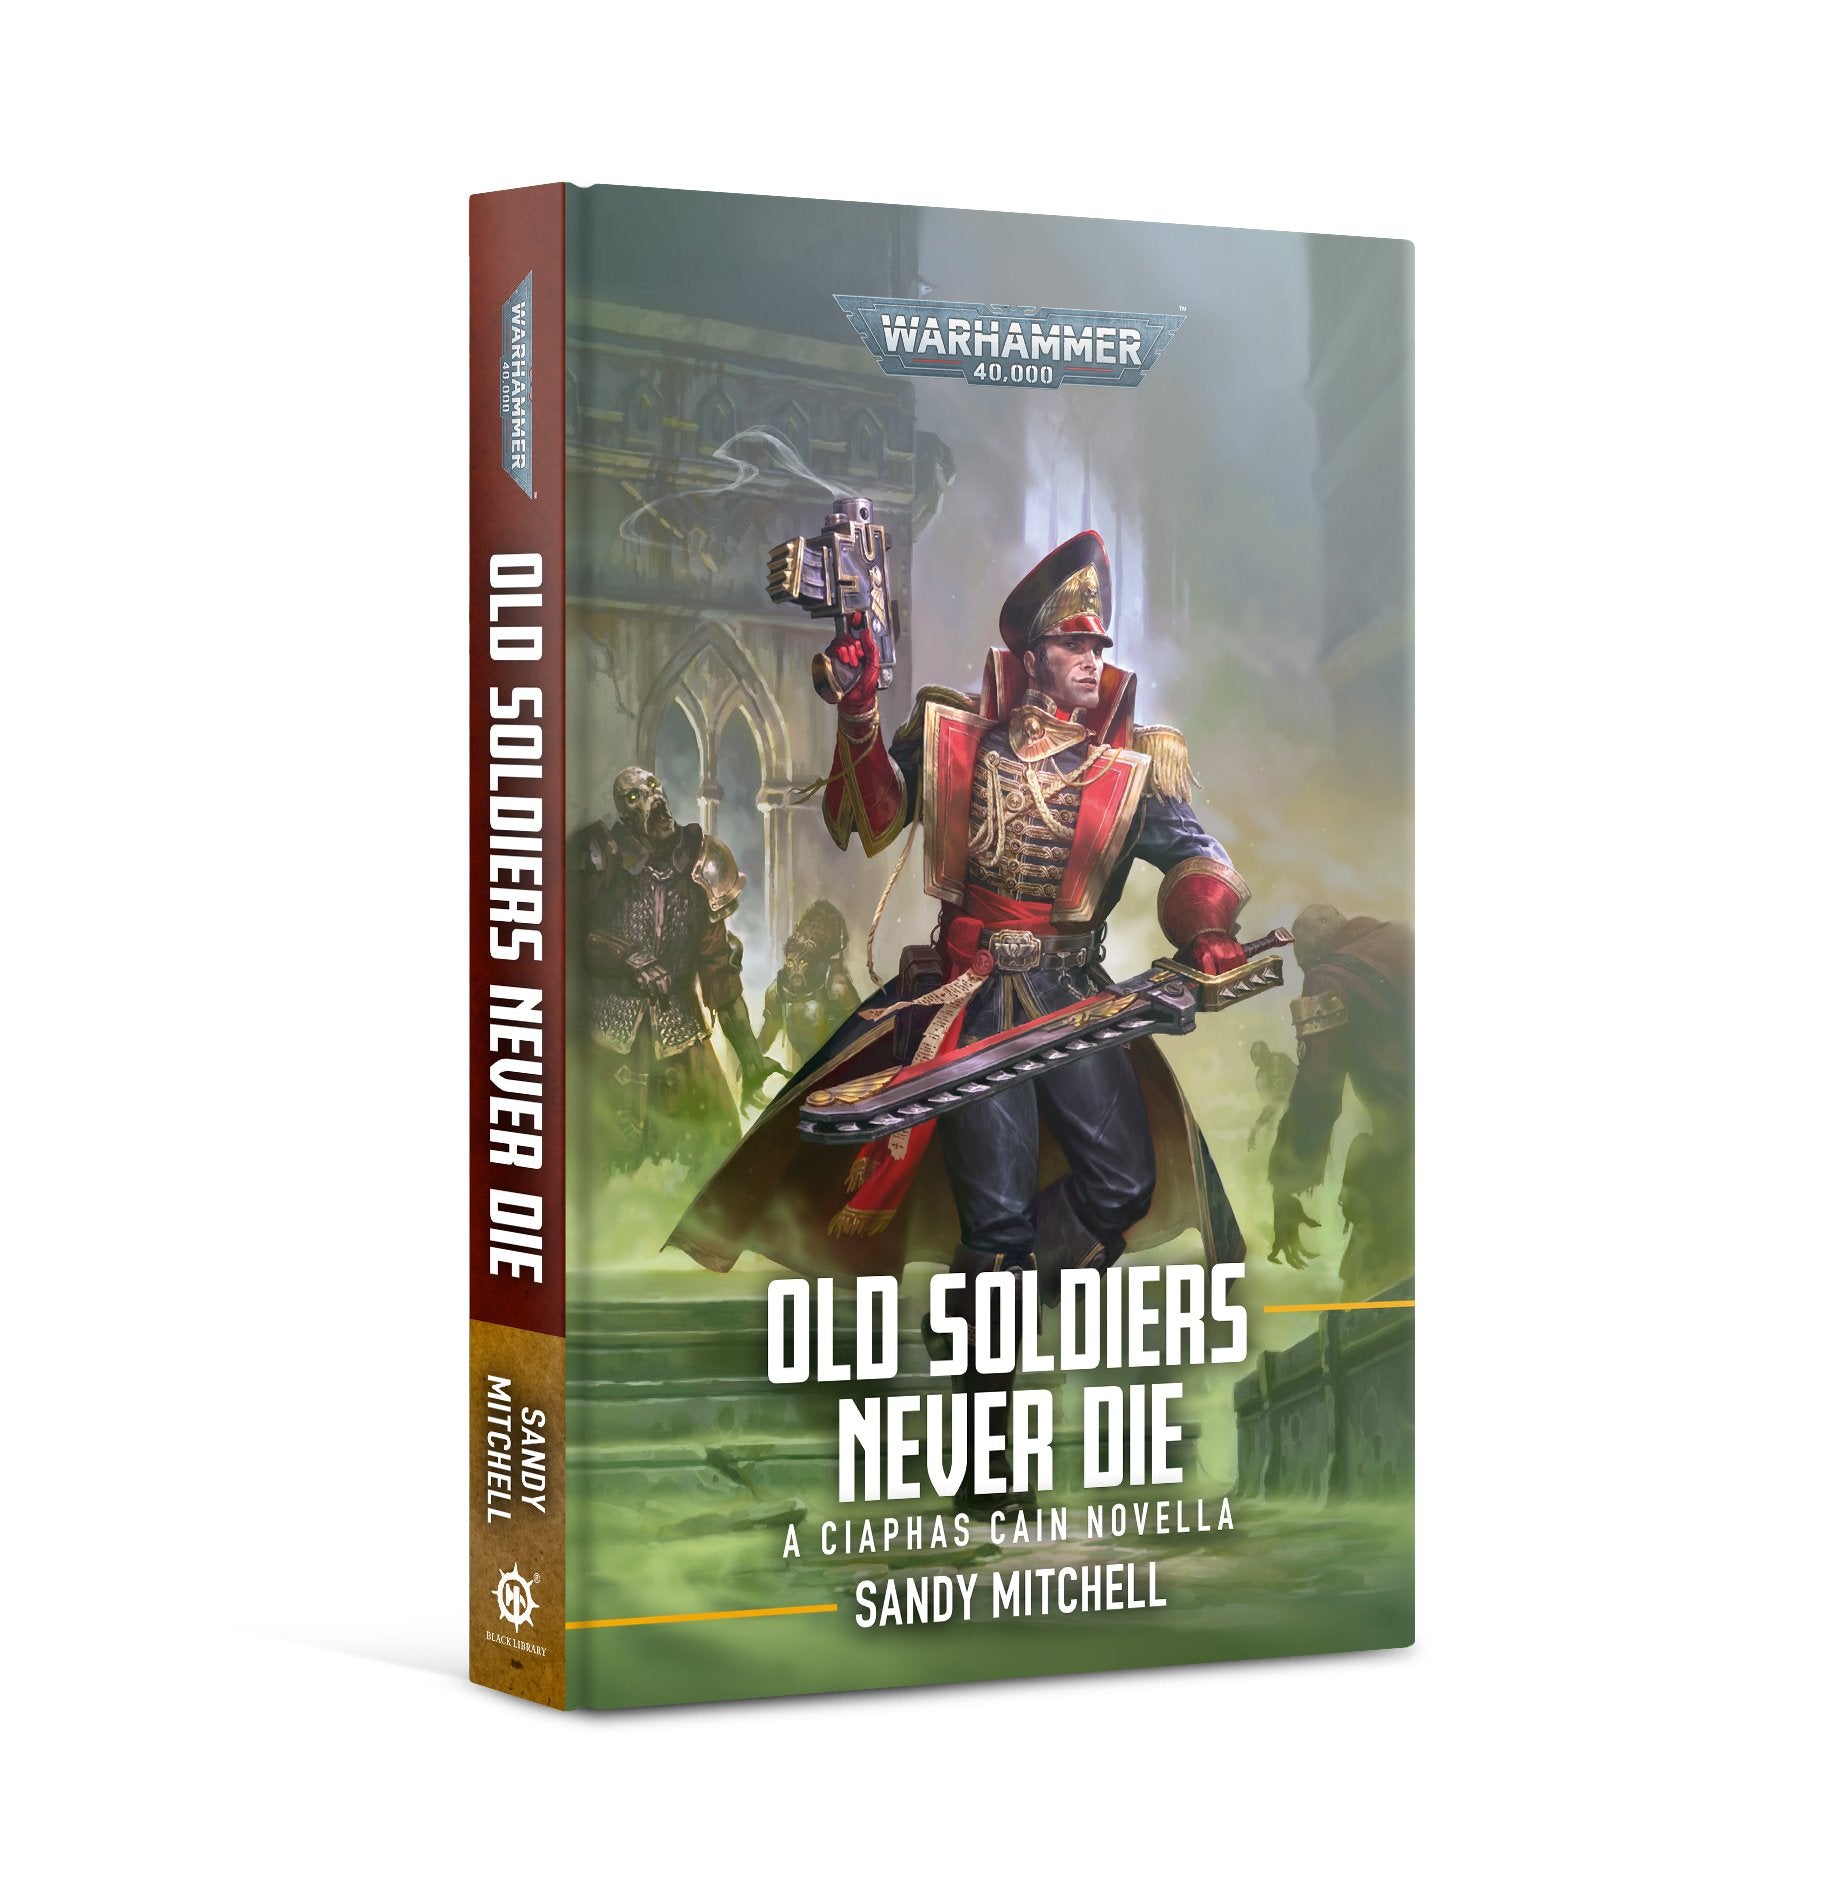 Ciaphas Cain: Old Soldiers Never Die (Paperback) | Mythicos